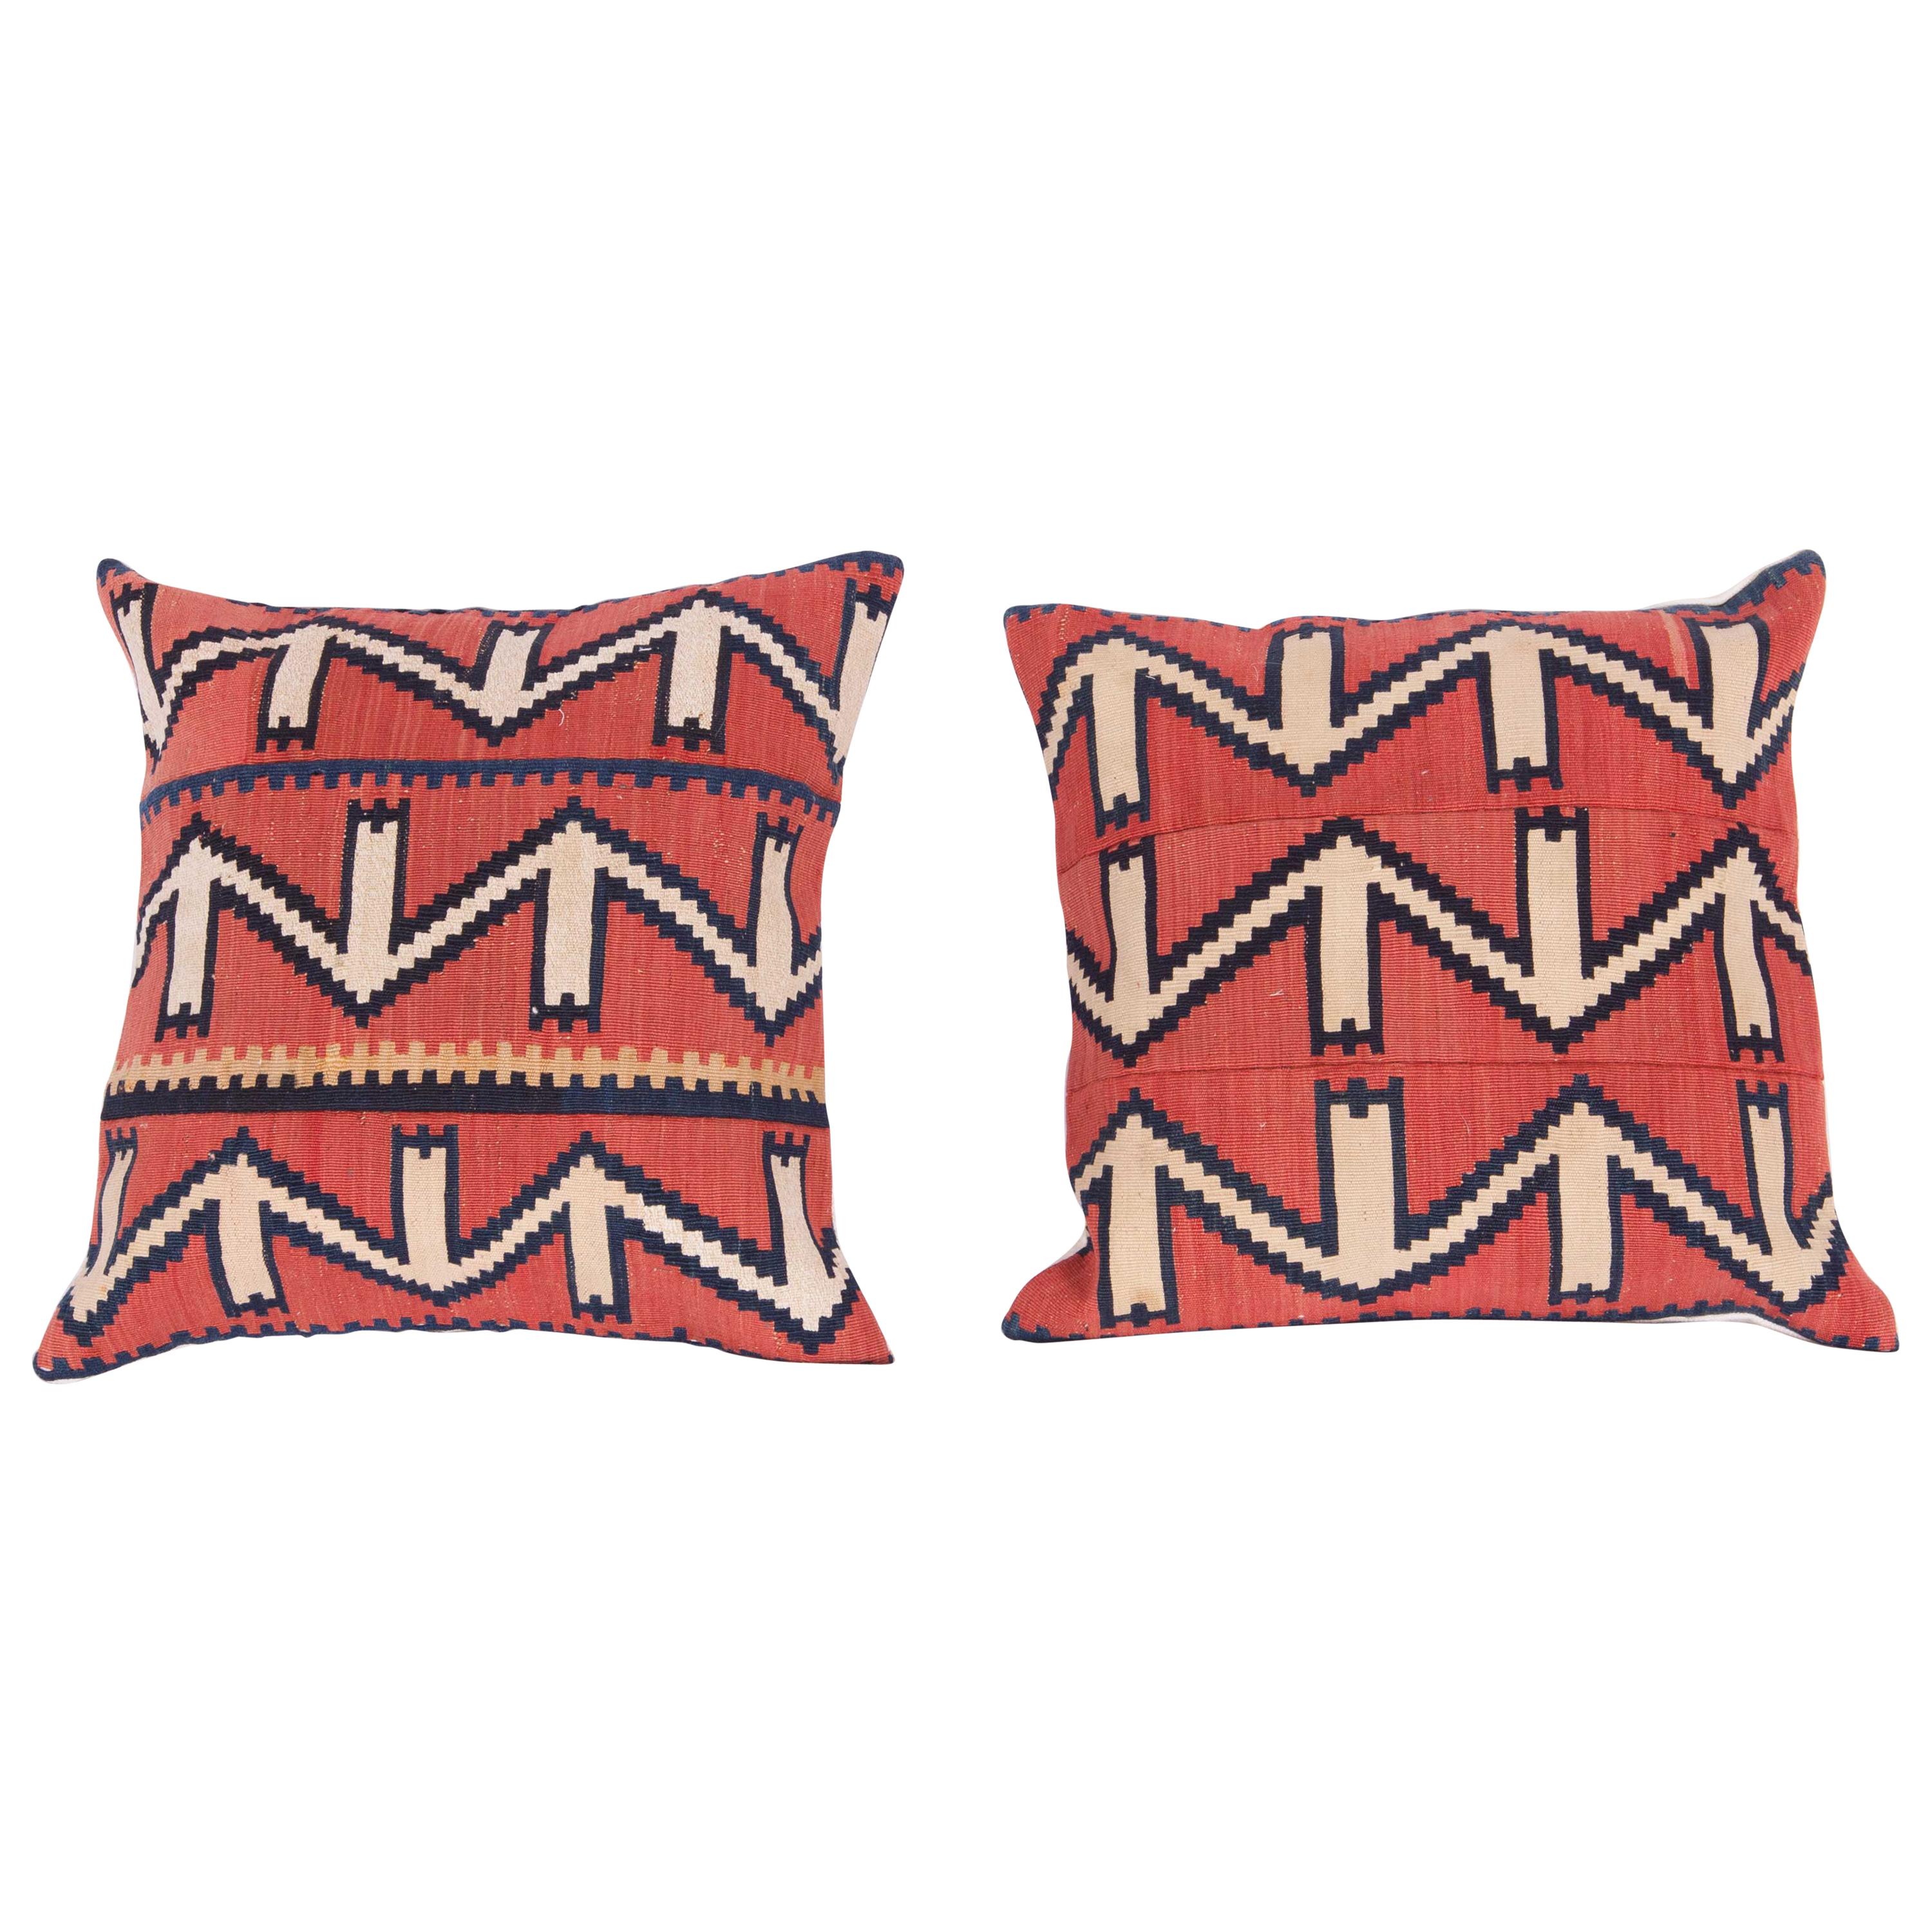 Pillow / Cushion Covers Made from an Antique Kuba Kilim, 19th Century